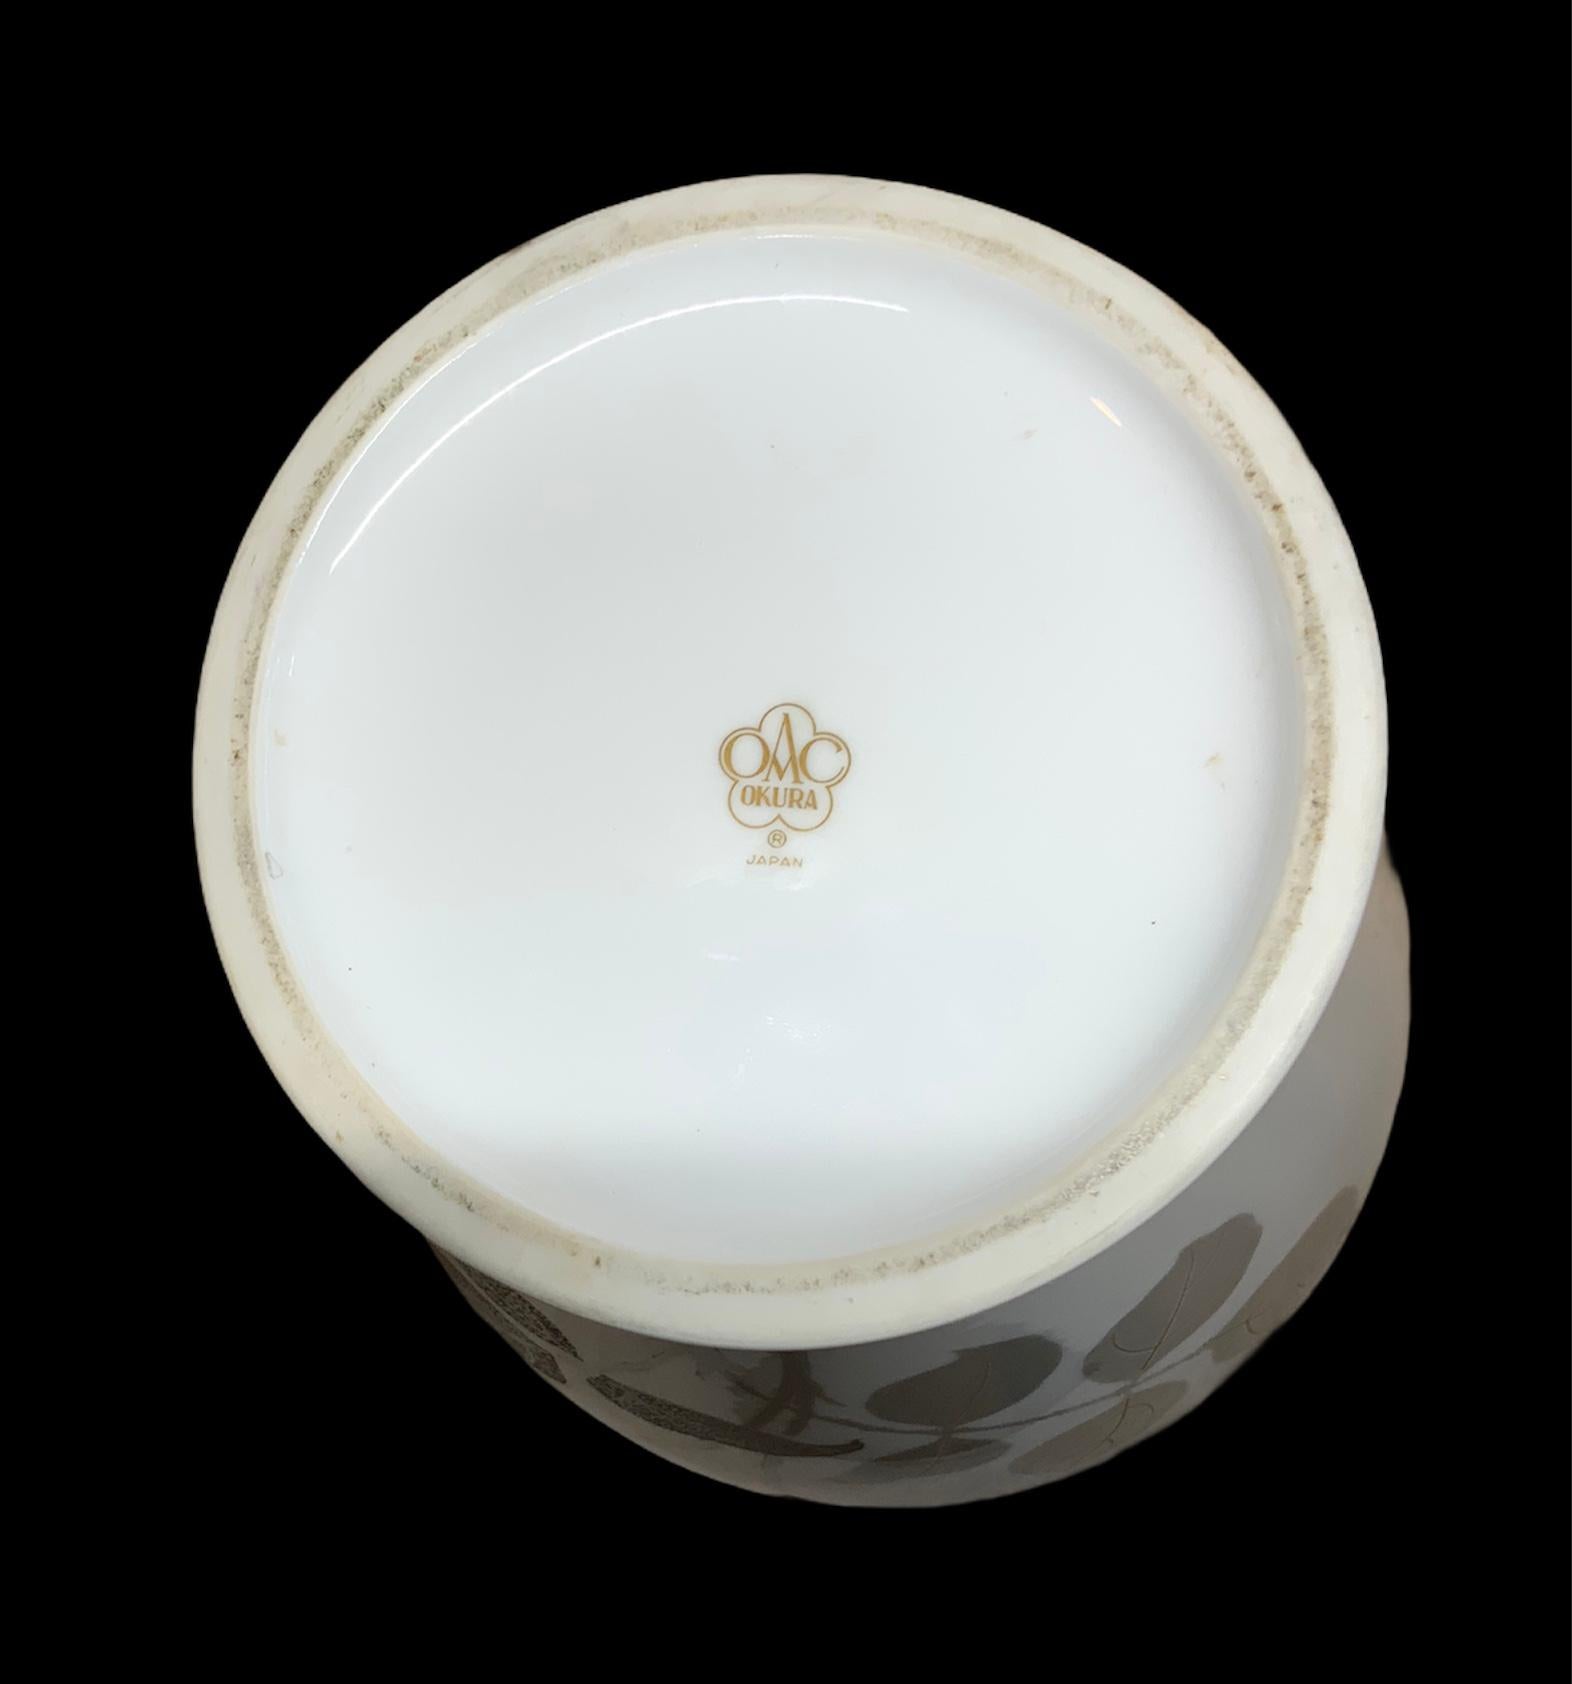 This a Noritake, Okura porcelain flower vase hand painted white in the background with a large gold and silver etching rose in the front and rose bud branches in the back. Also the rim is painted gold. Under the base is hallmarked Okura, Japan (one